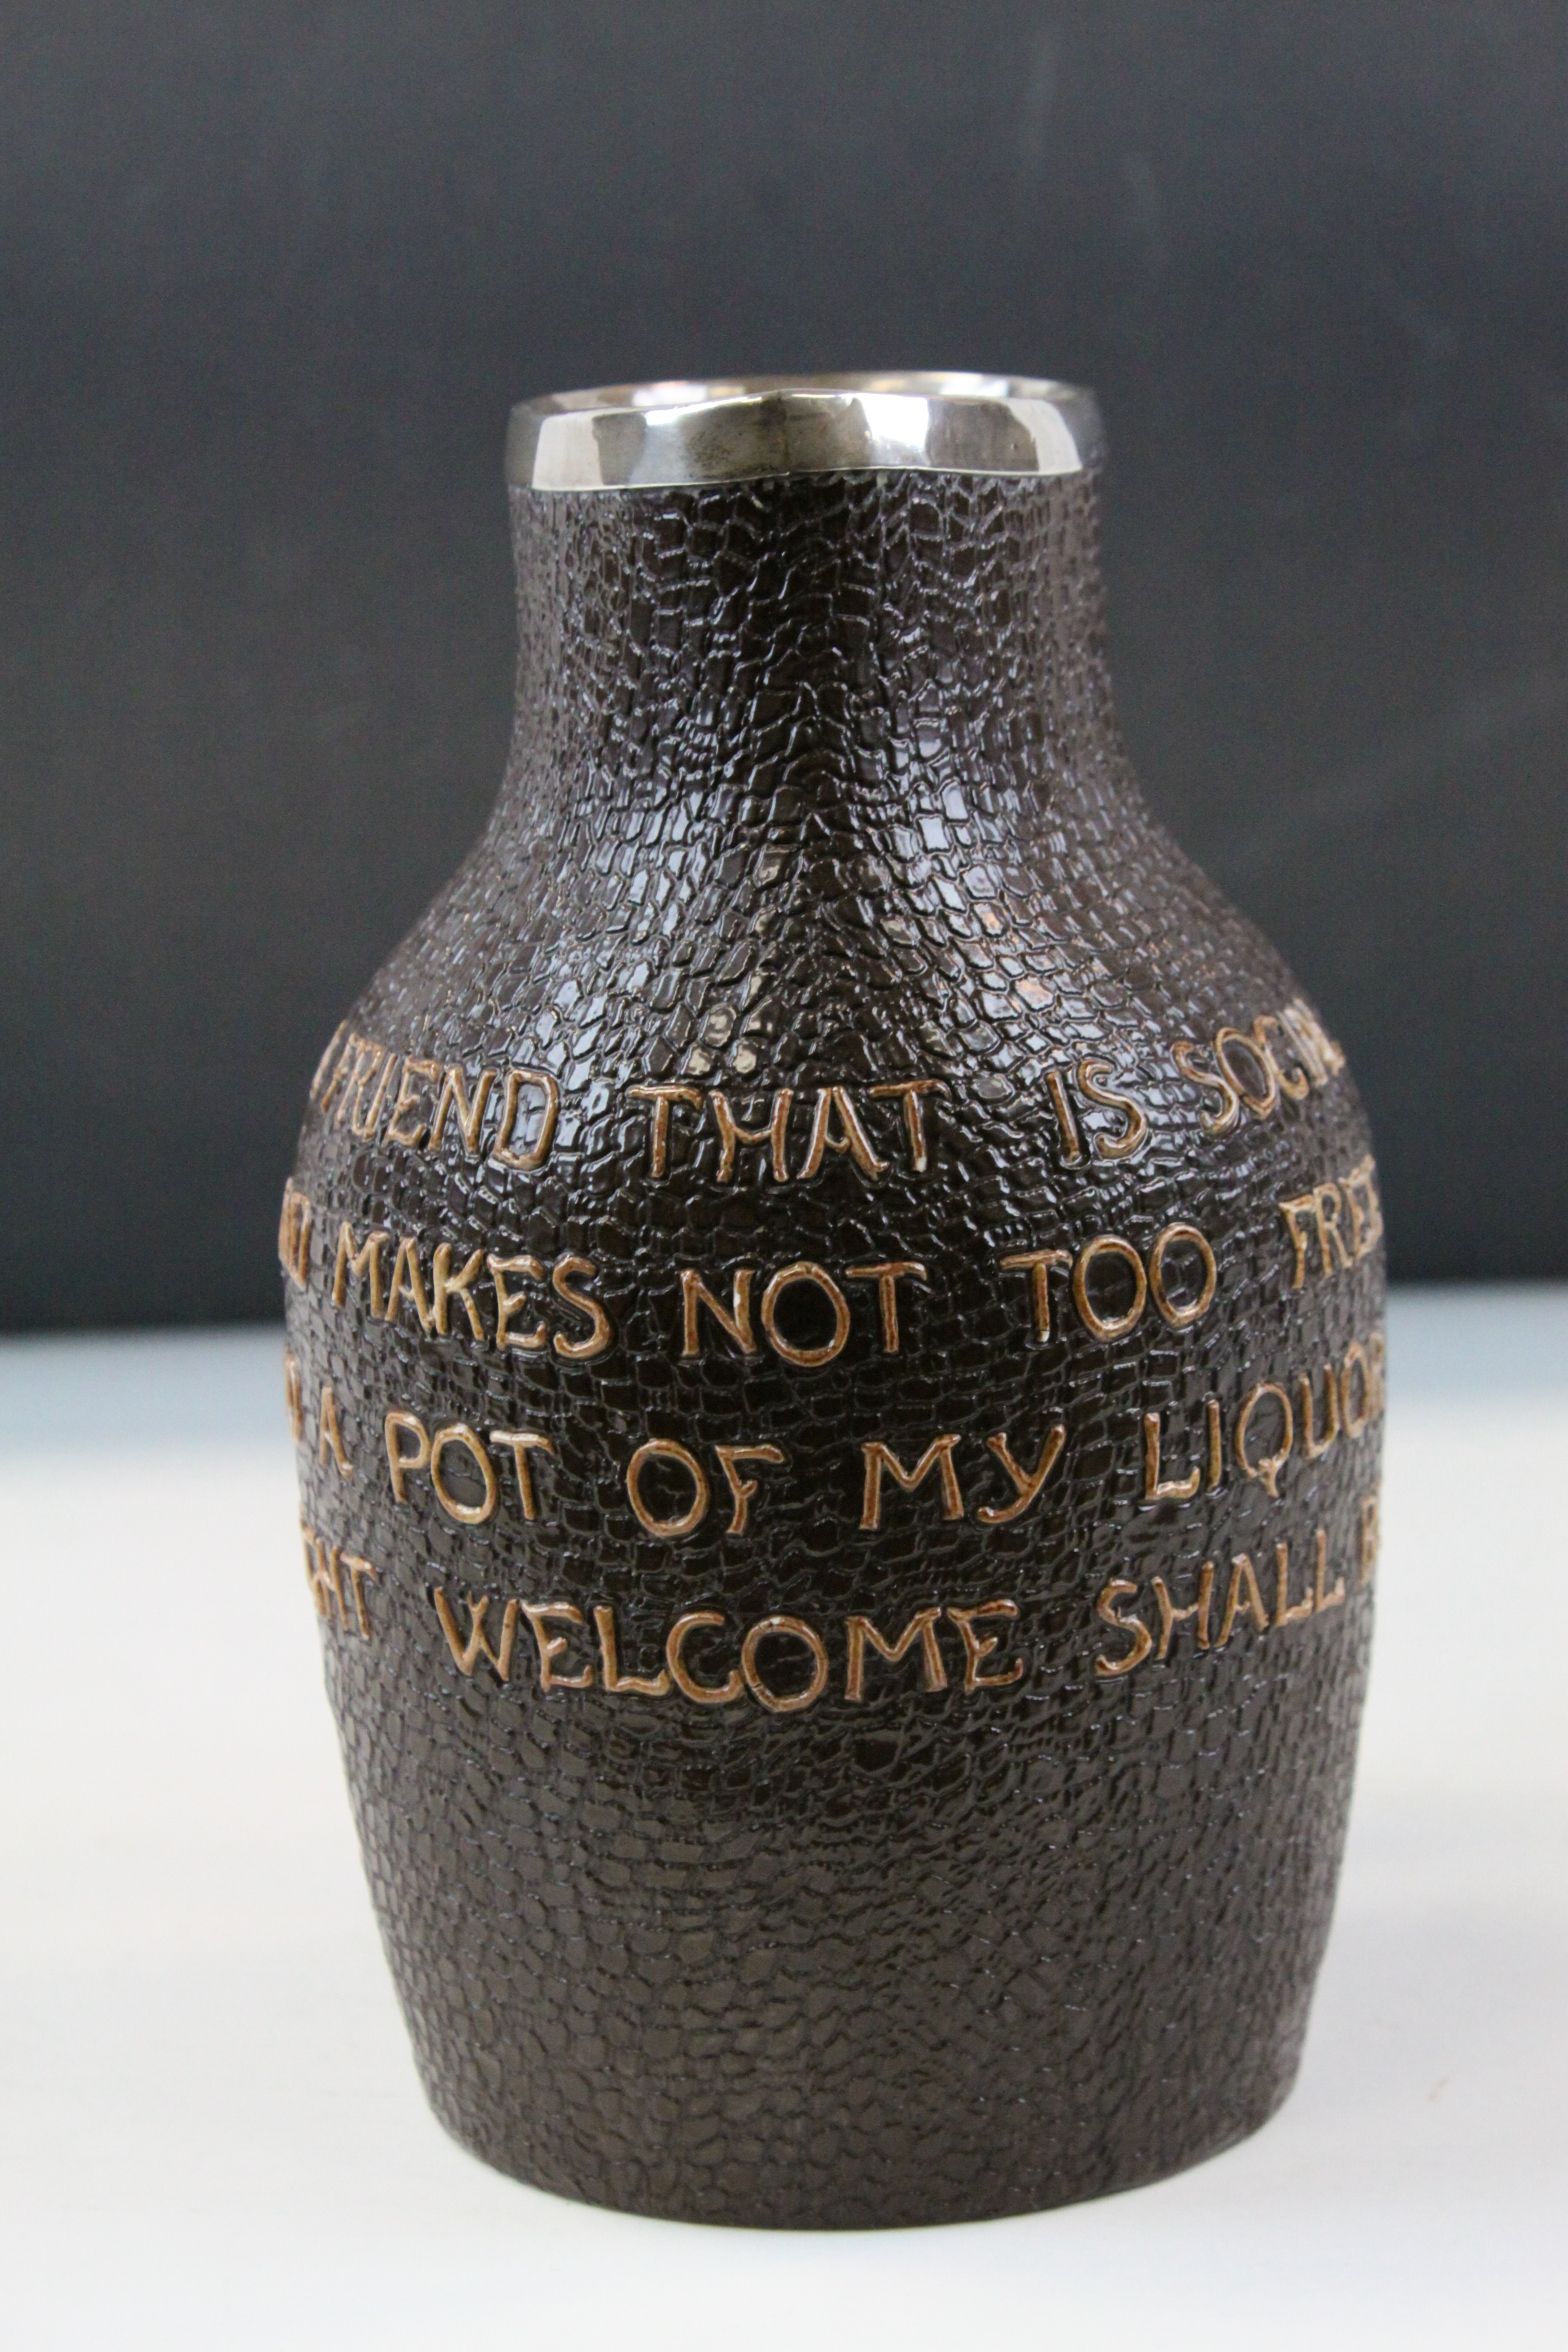 Doulton Lambeth Stater's Patent Stoneware Water jug with Leather effect finish and inscription - Image 2 of 8